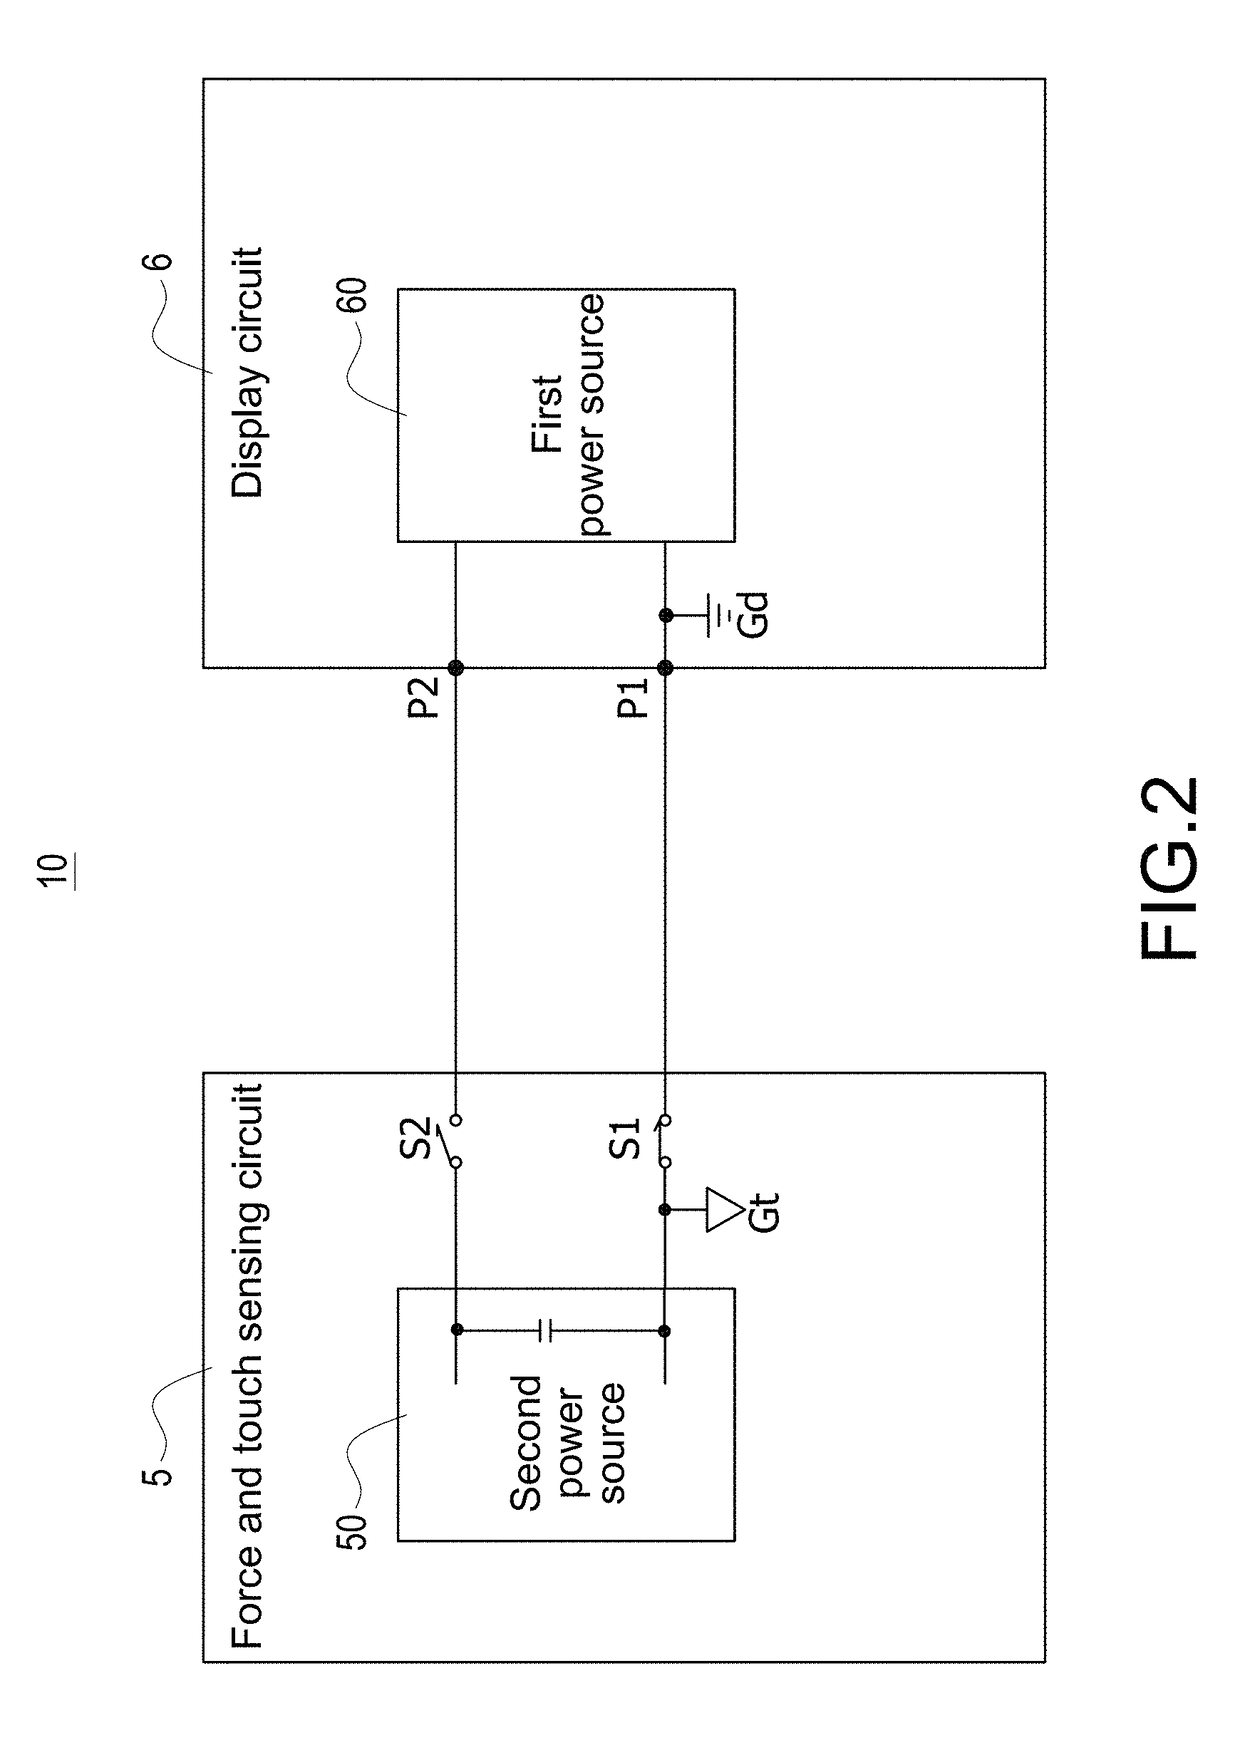 Method for operating electronic apparatus with independent power sources